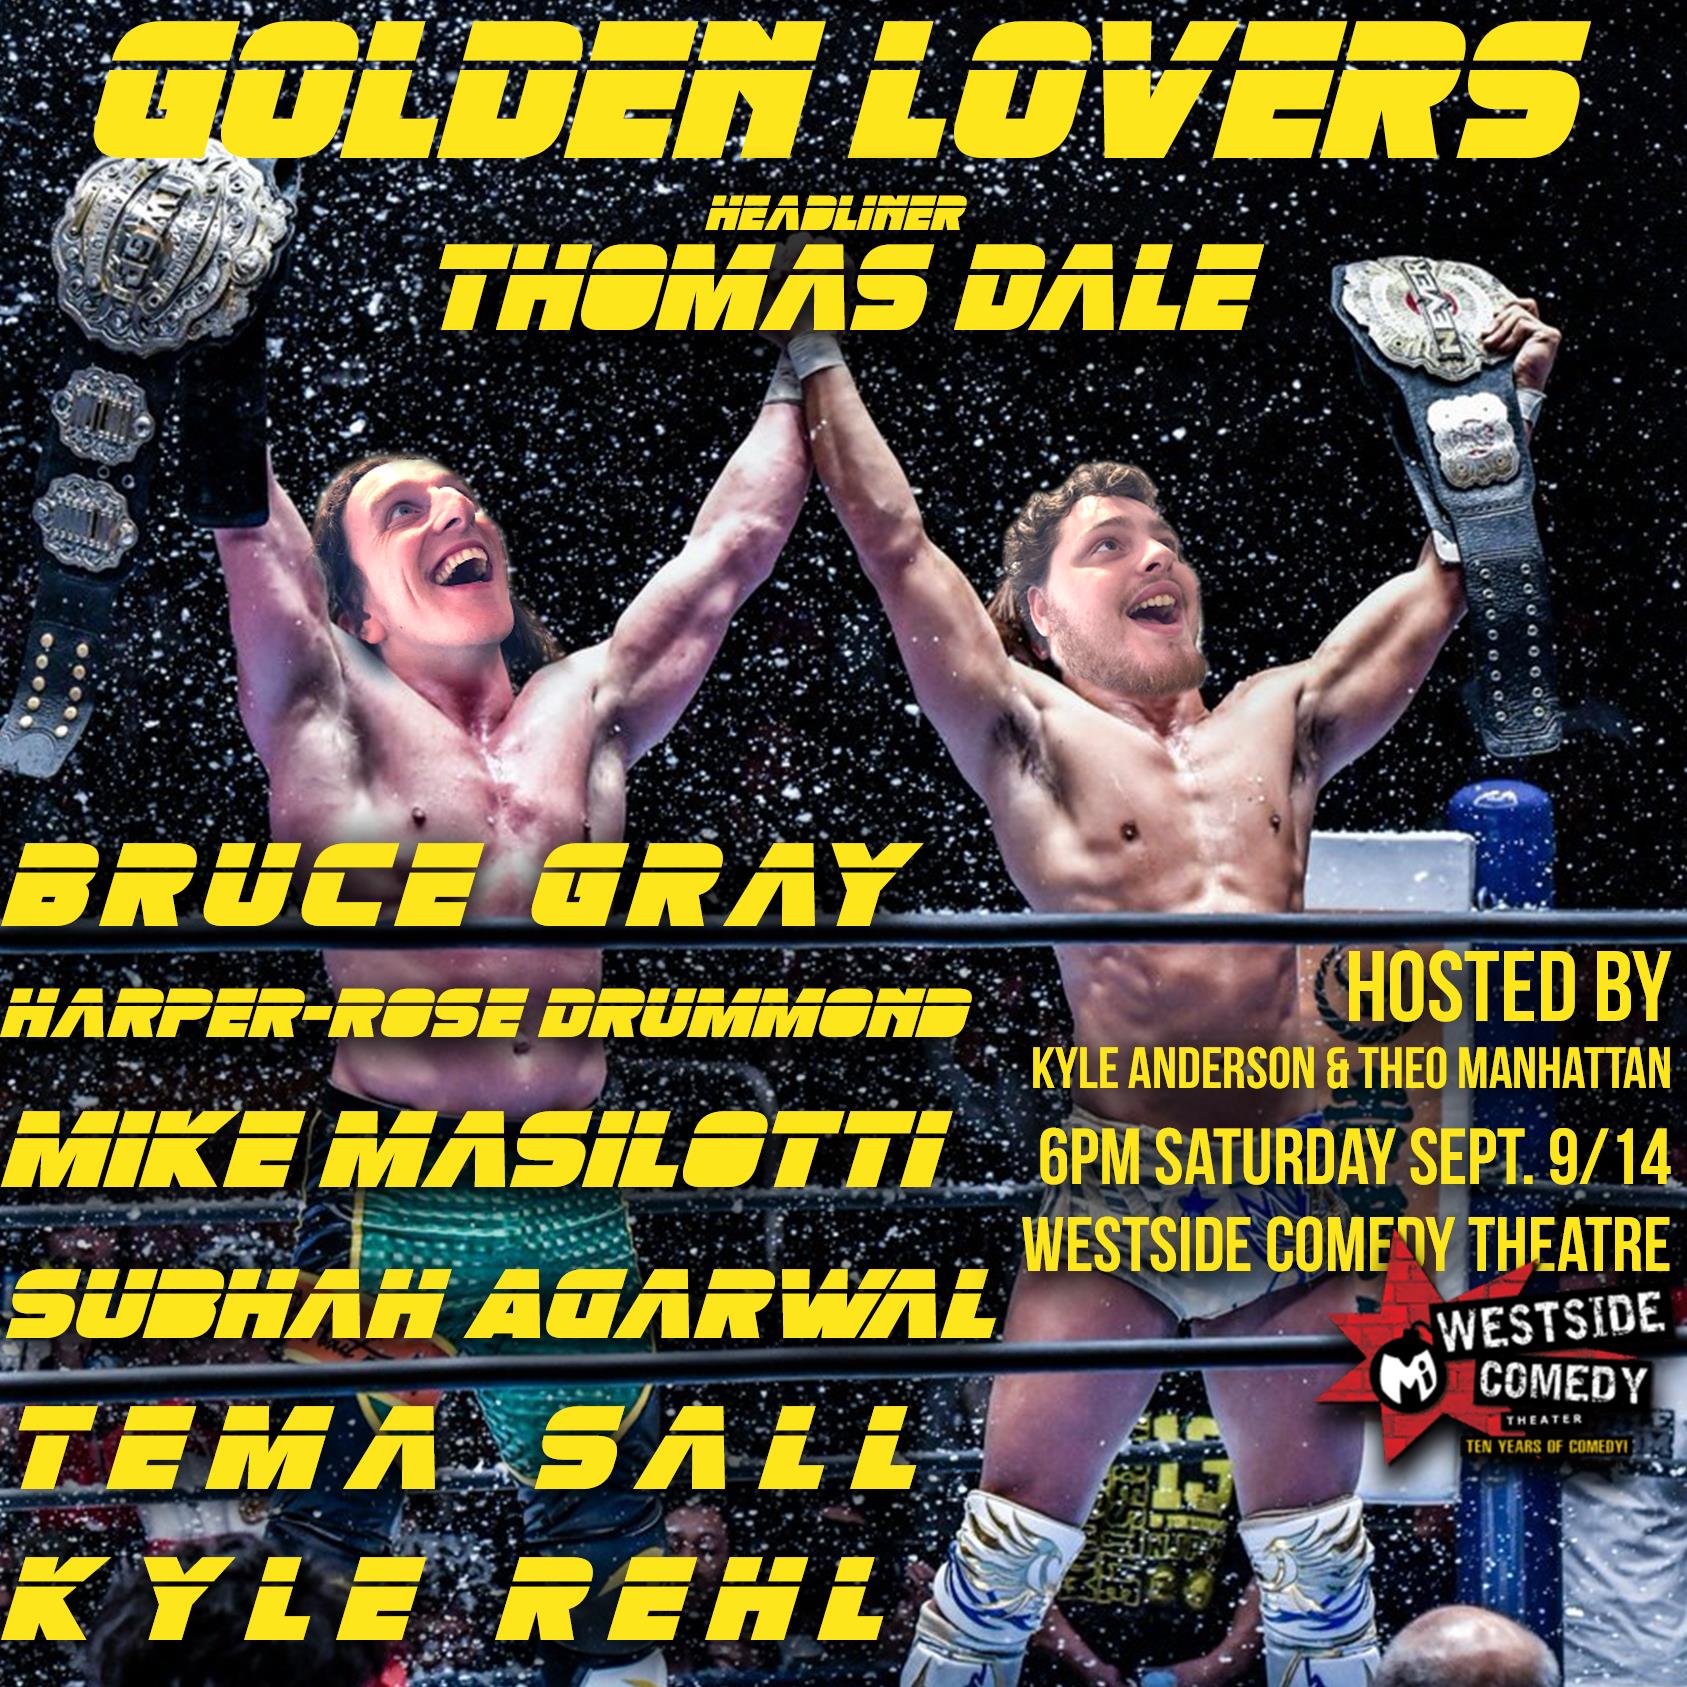 Golden Lovers: Live at Westside Theater